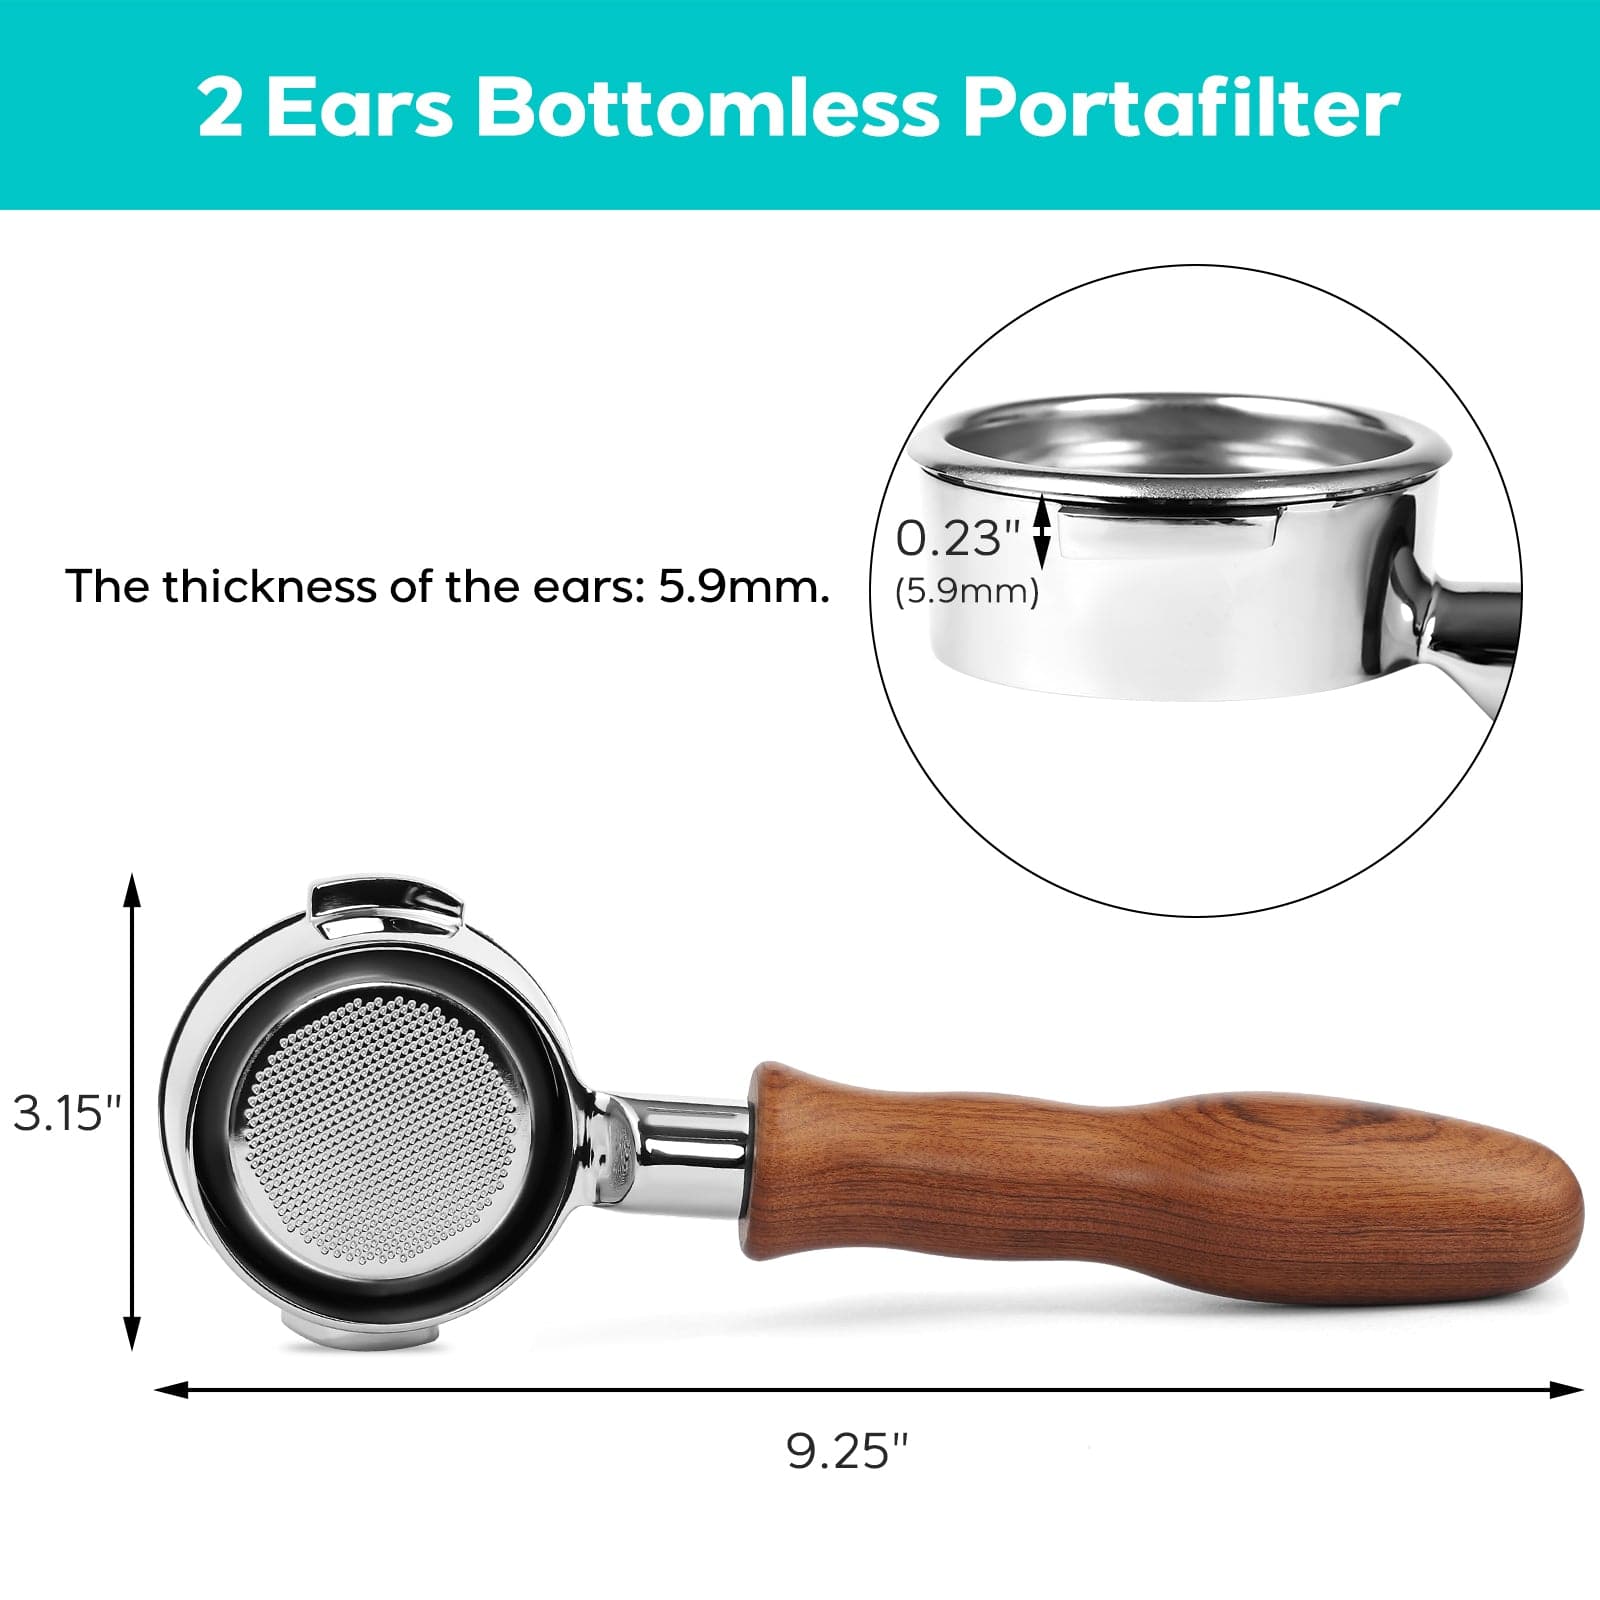 58mm Bottomless Stainless-steel Portafilter with 3 Ears